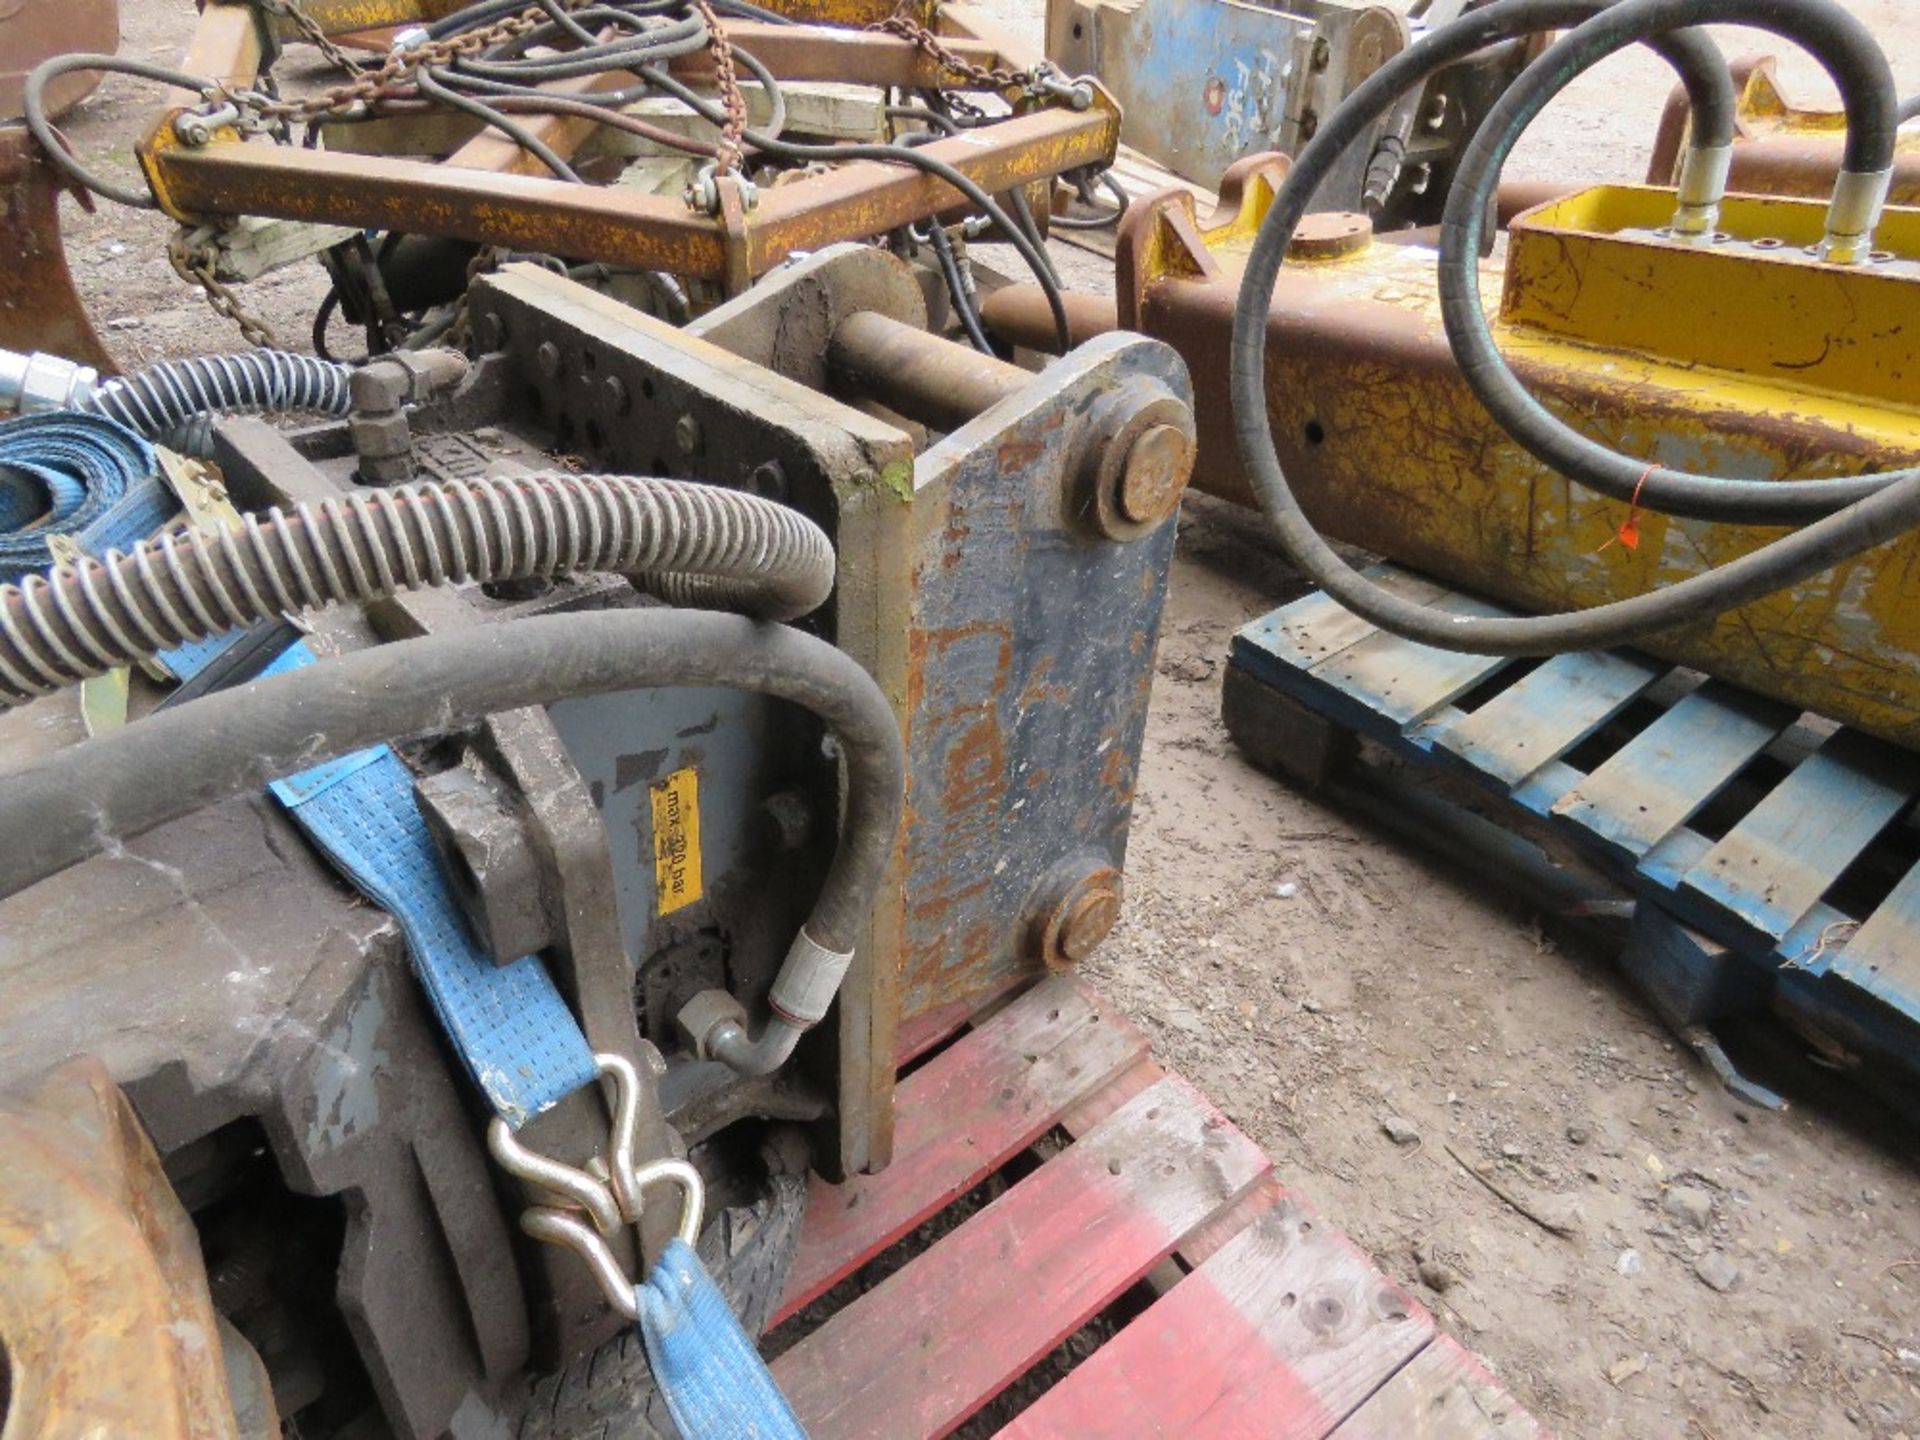 FEMAC EXCAVATOR MOUNTED HEAVY DUTY FLAIL HEAD ON 80MM PINS. UNTESTED, CONDITION UNKNOWN. - Image 9 of 10